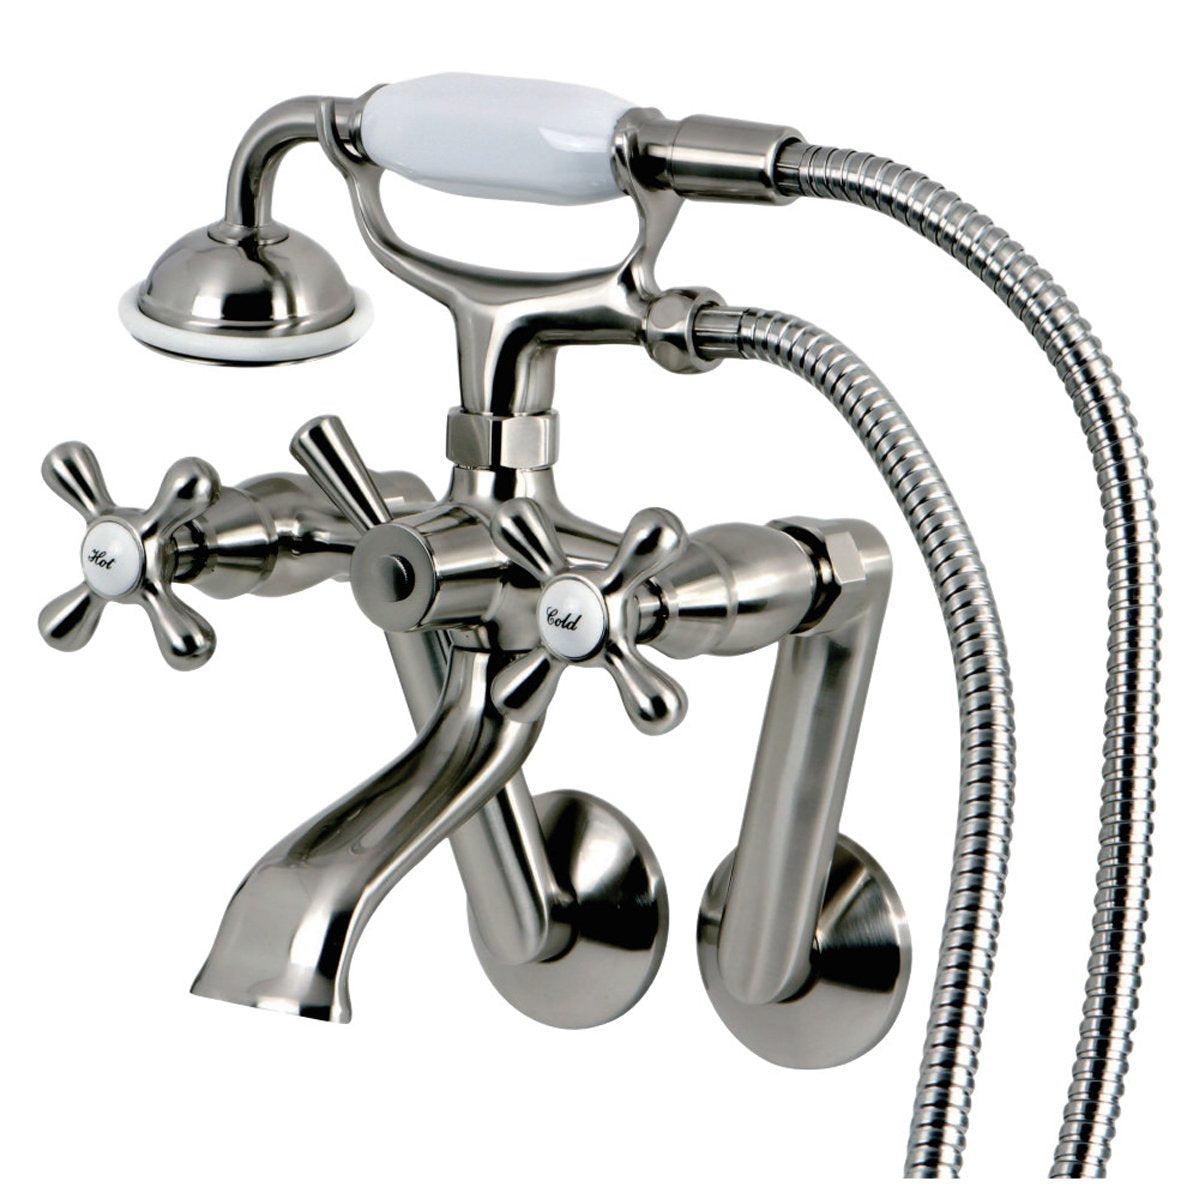 Kingston Brass 2-Hole Tub Wall Mount Clawfoot Tub Faucet with Hand Shower